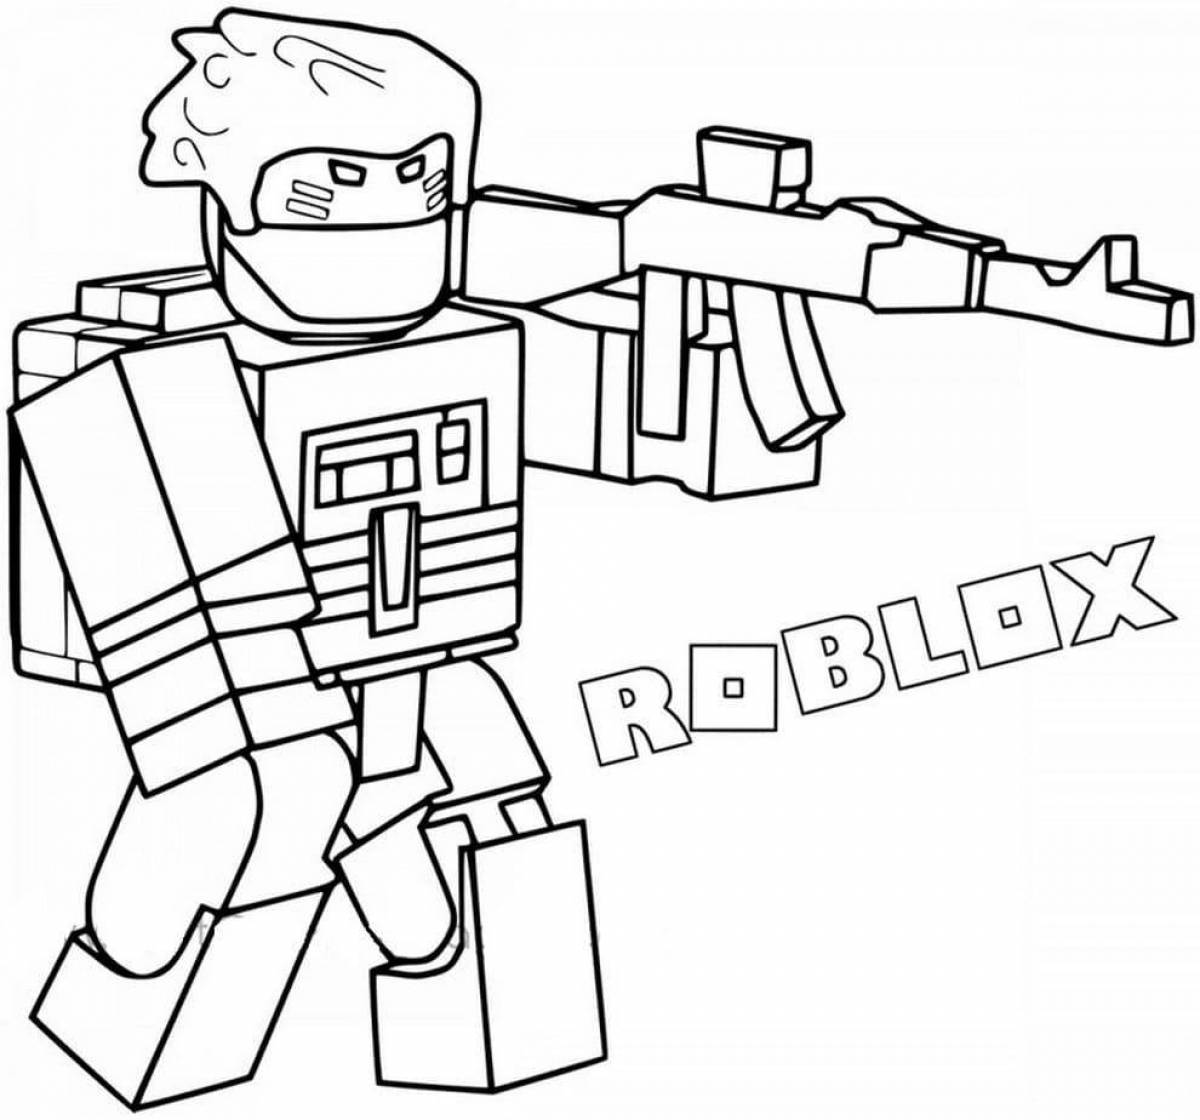 Roblox body coloring page